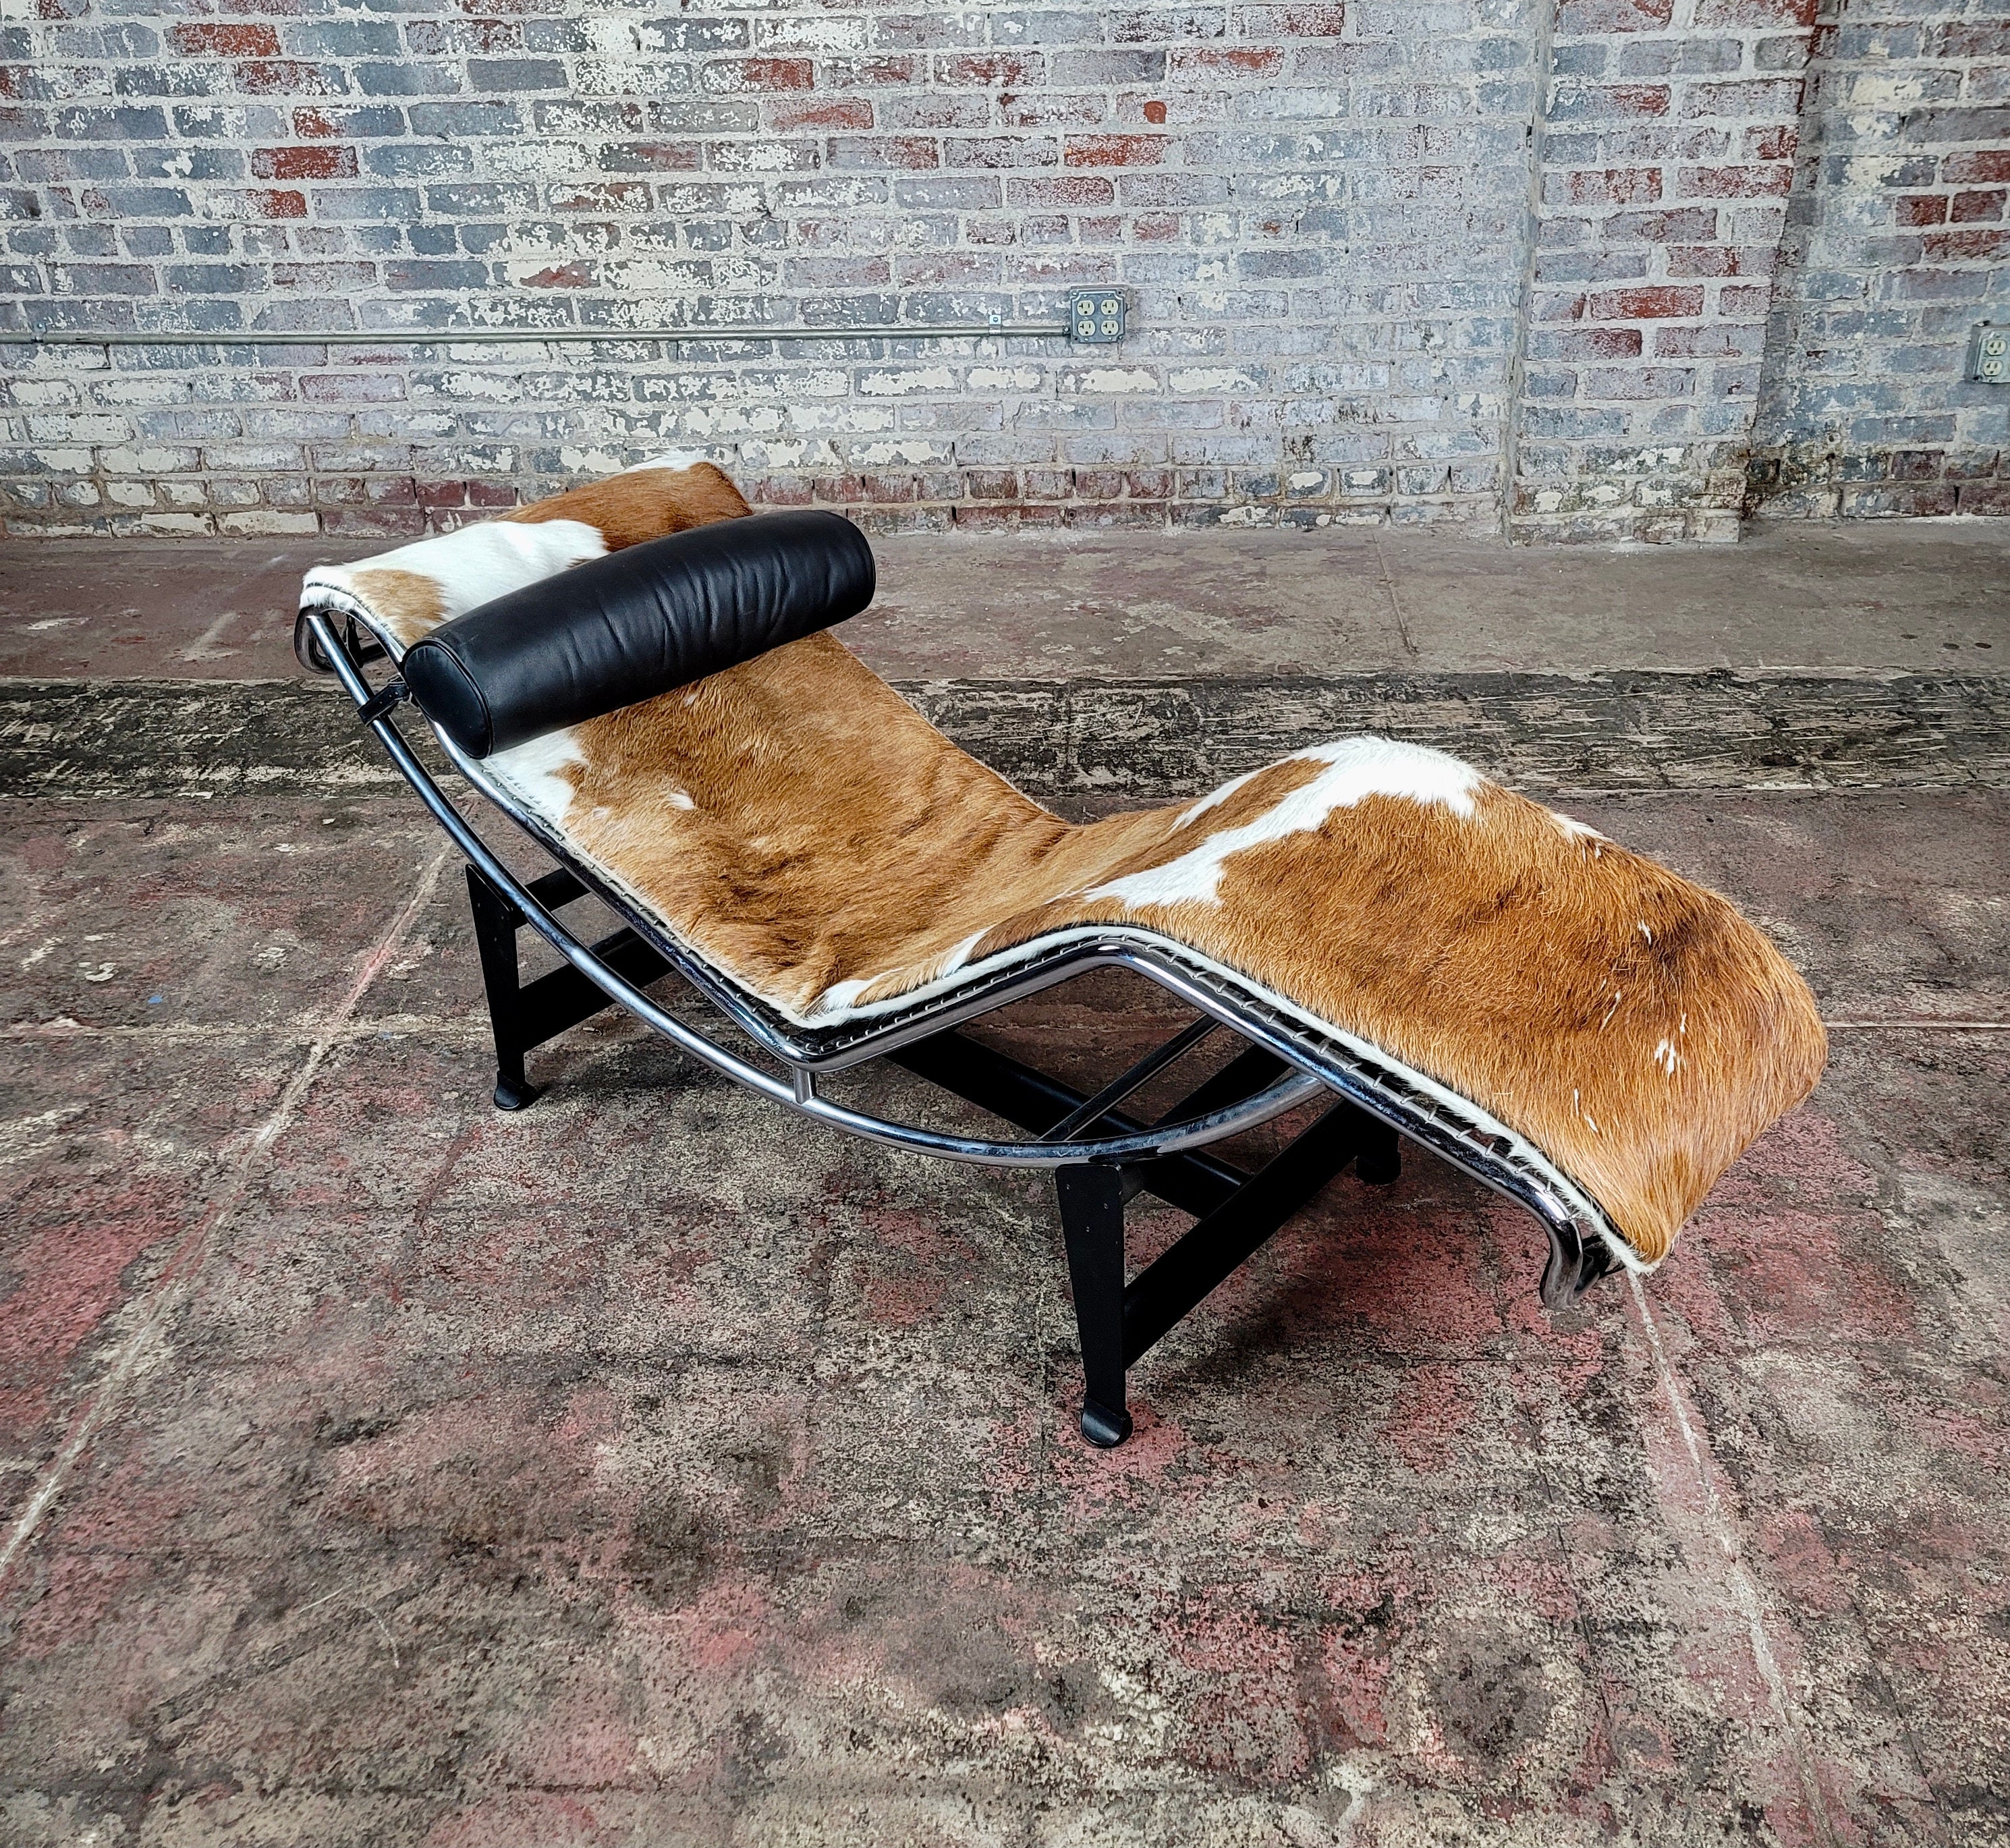 Le Corbusier LC4 Chaise Lounge - Pony Leather - Reproduction